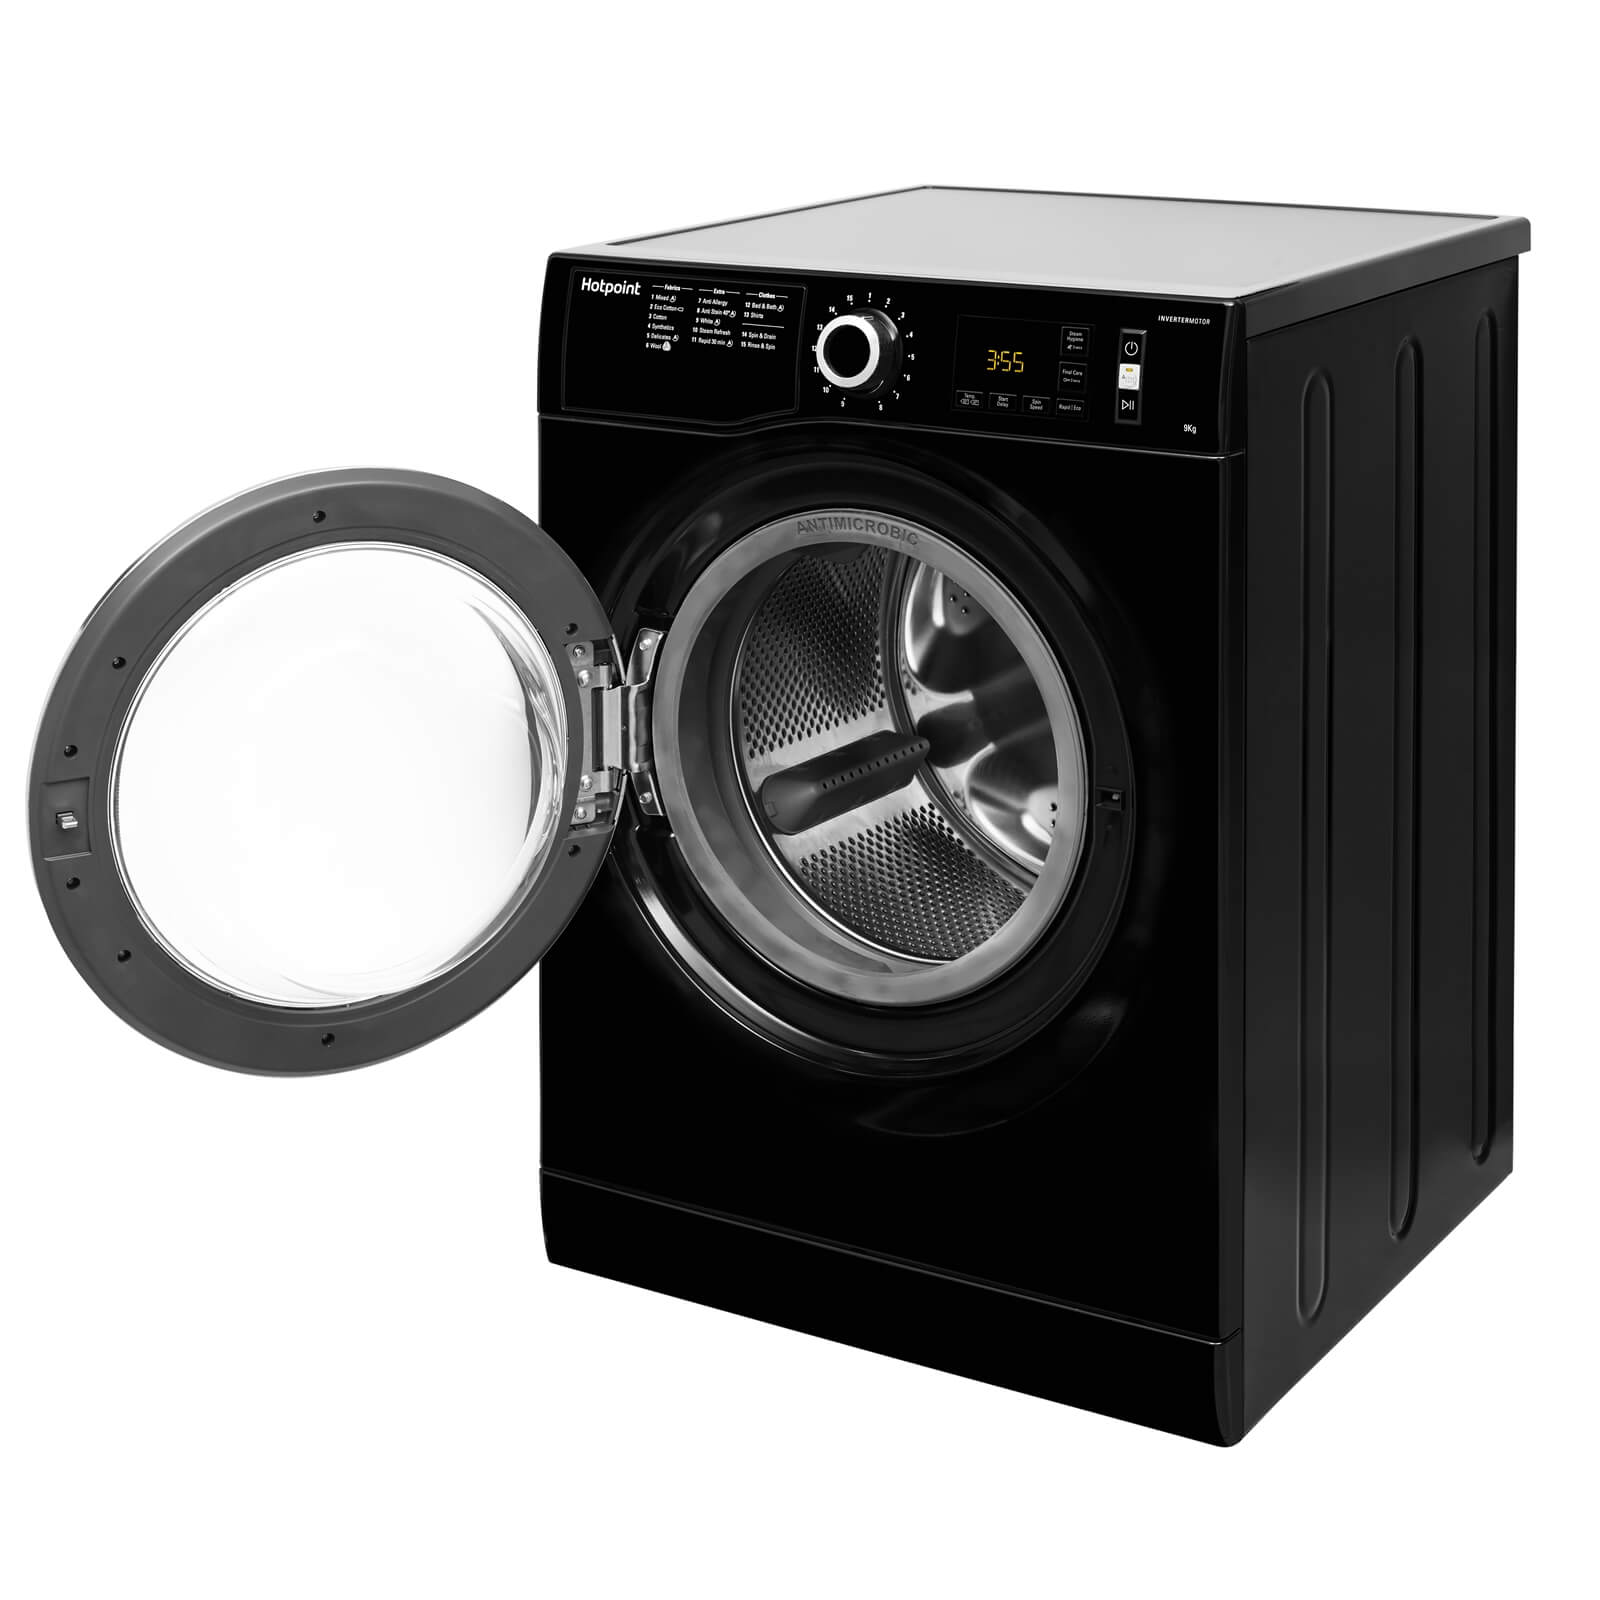 Hotpoint ActiveCare NM11 946 BC A Washing Machine - Black